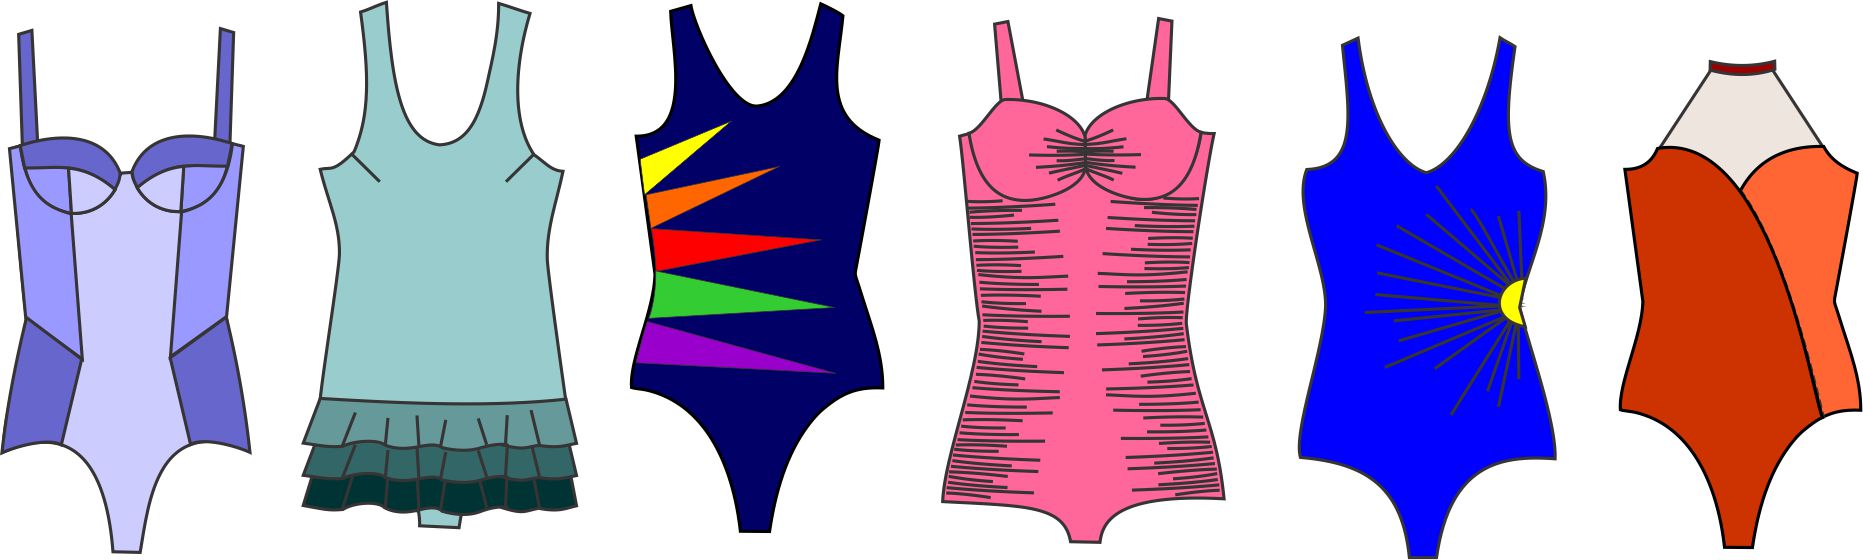 Swimming Costume Designs: A Guide for Swimmers